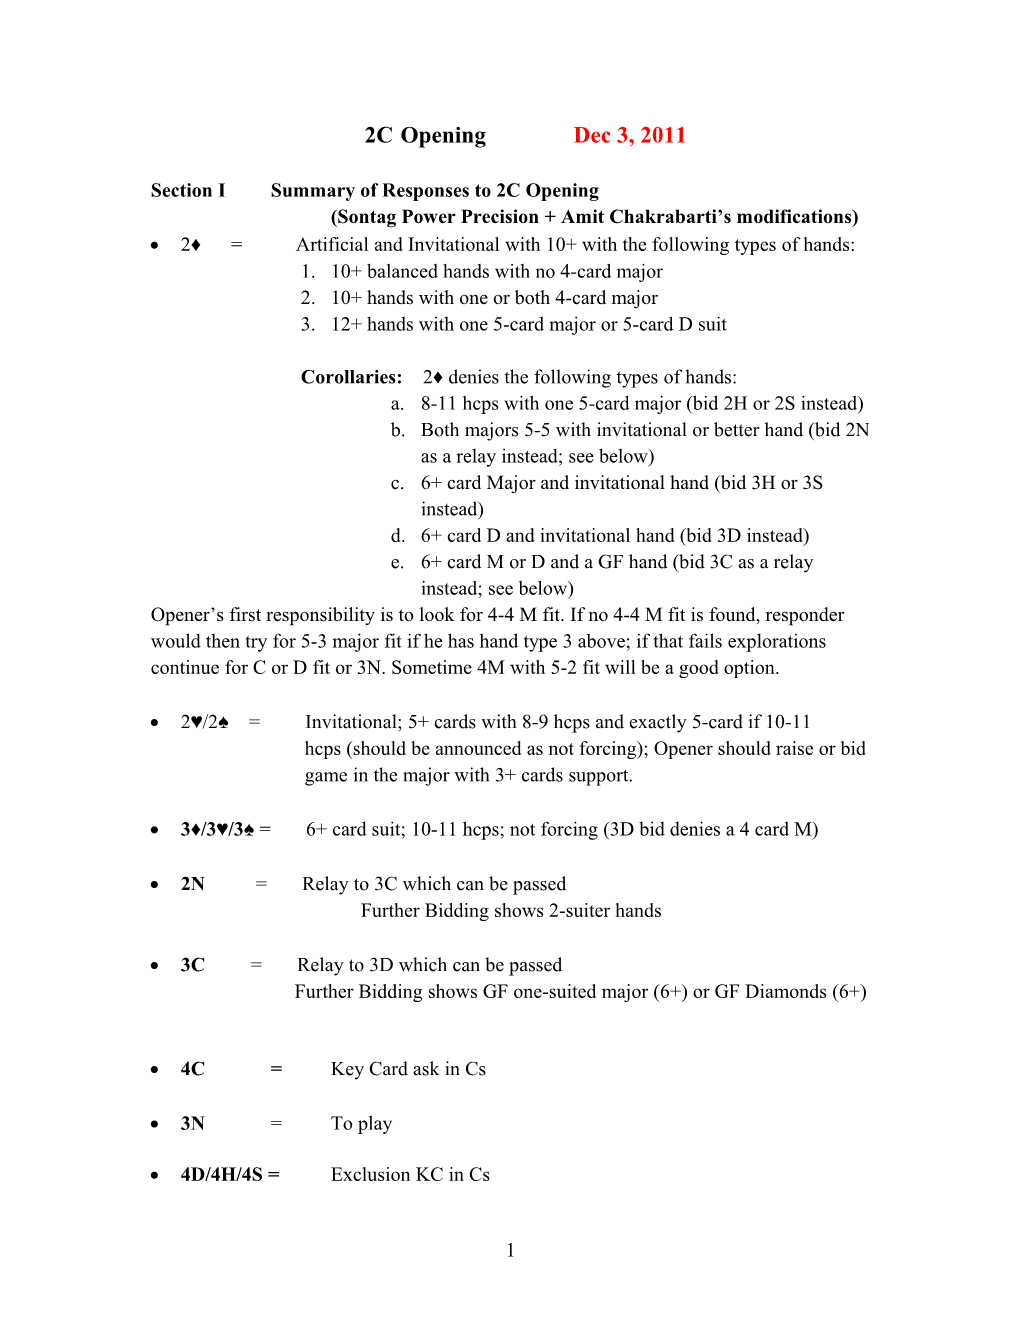 Section I Summary of Responses to 2C Opening